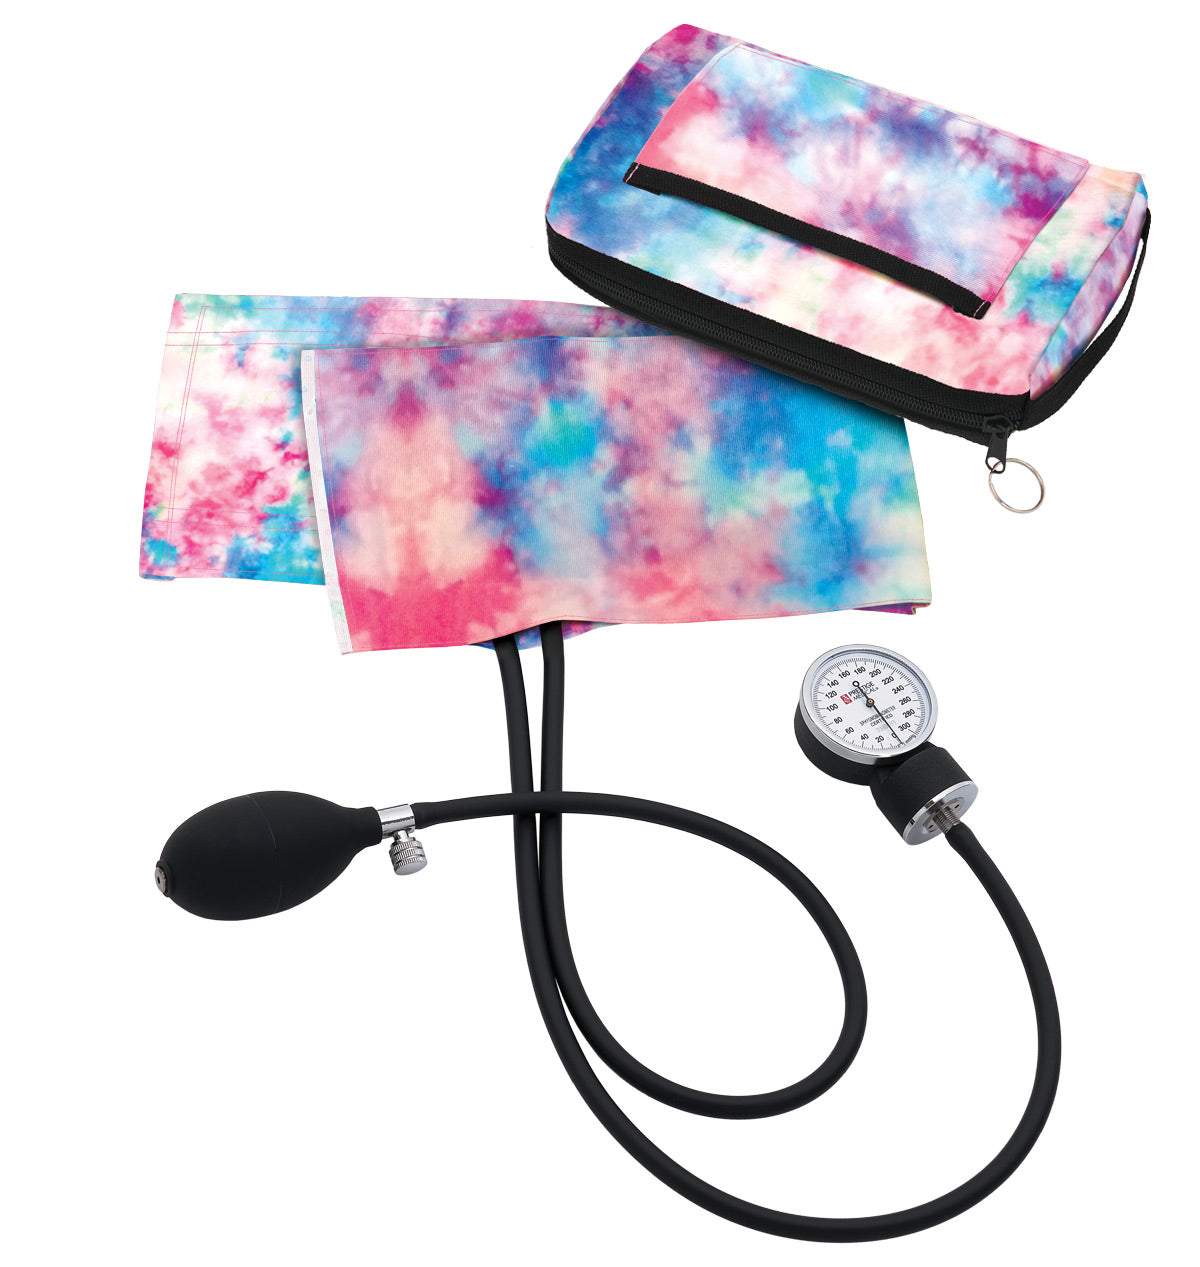 Premium Aneroid Sphygmomanometer with Carry Case by Prestige /  Tie Dye Cotton Candy Sky